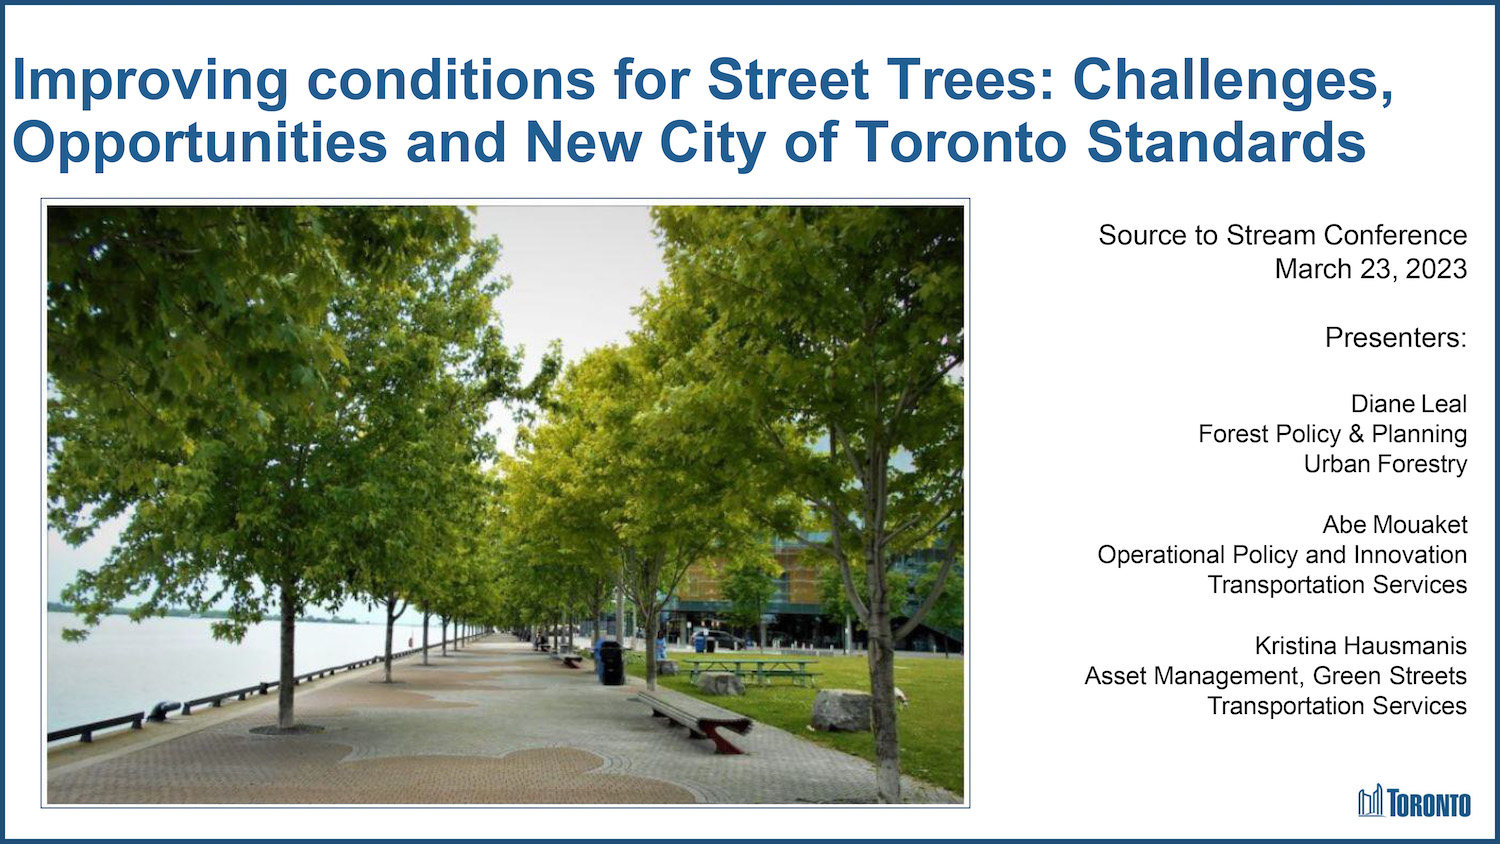 Panel Presentation - Improving Conditions for Street Trees - Challenges Opportunities and New City of Toronto Standards